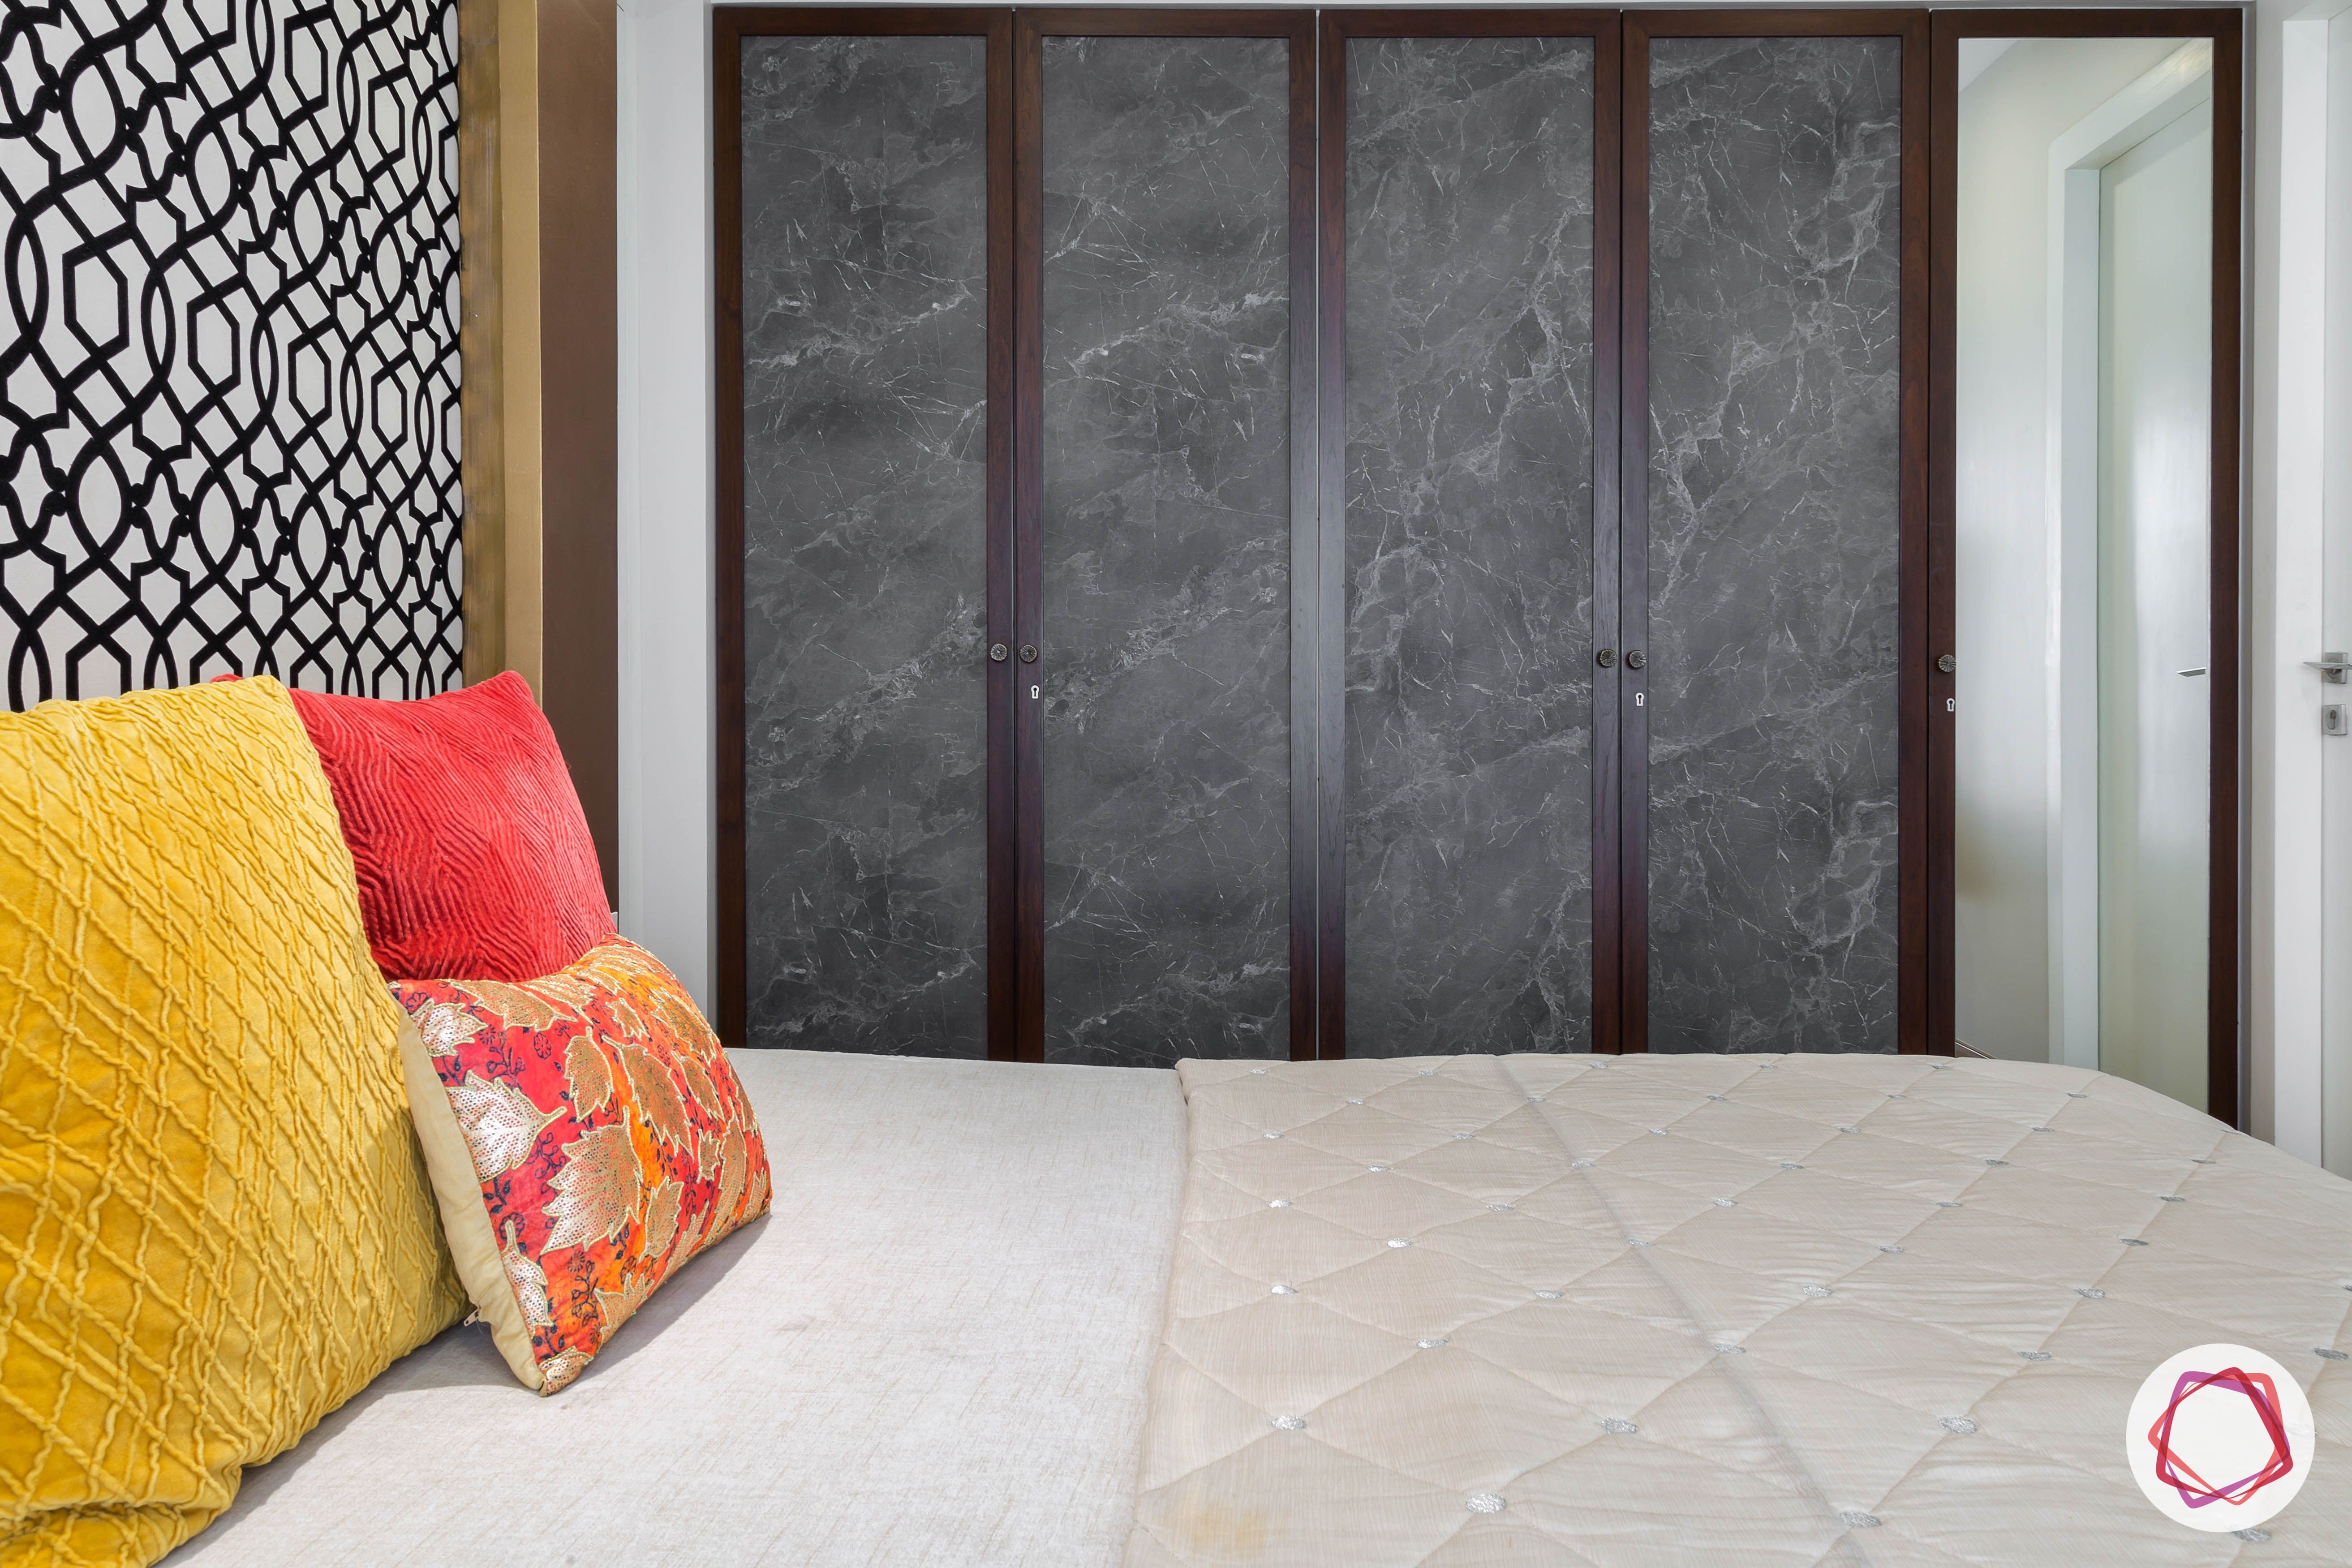 almirah designs for small rooms-floor to ceiling wardrobe designs-floor-to-ceiling wardrobe designs